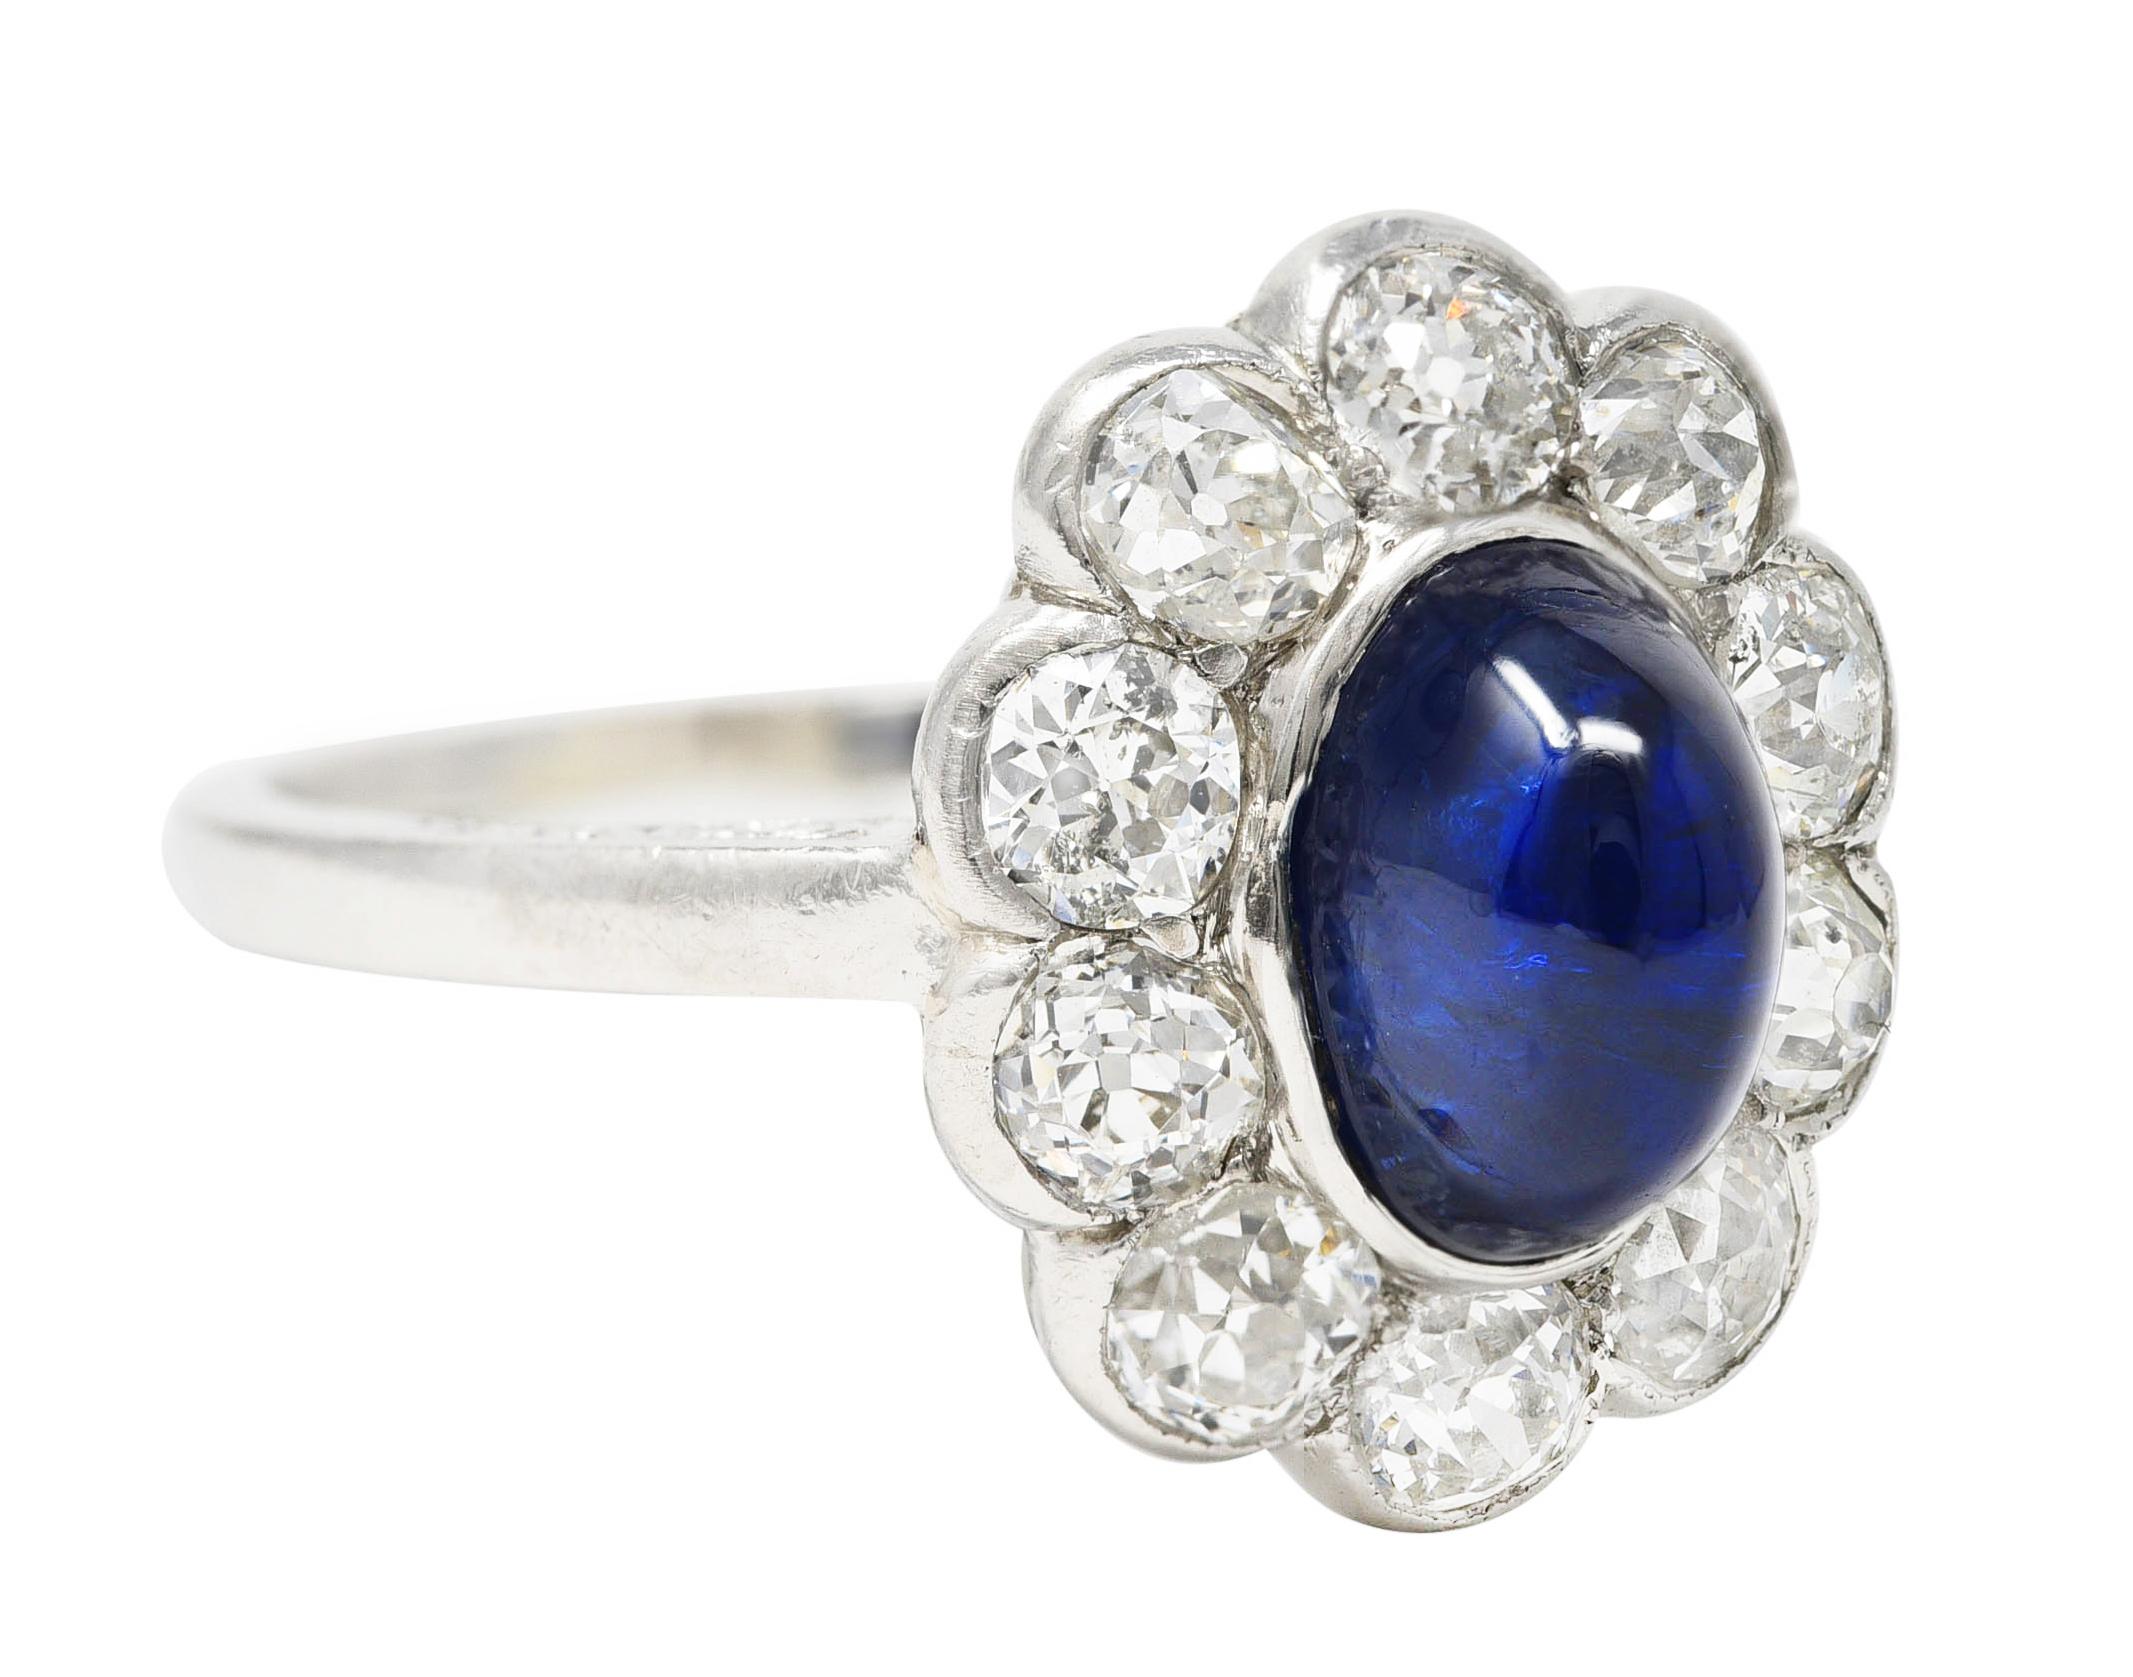 Centering an oval shaped sapphire sugarloaf cabochon weighing approximately 3.30 carats total. Semi-transparent medium/dark blue in color - bezel set with scalloped halo surround. Featuring old European cut diamonds weighing approximately 1.60